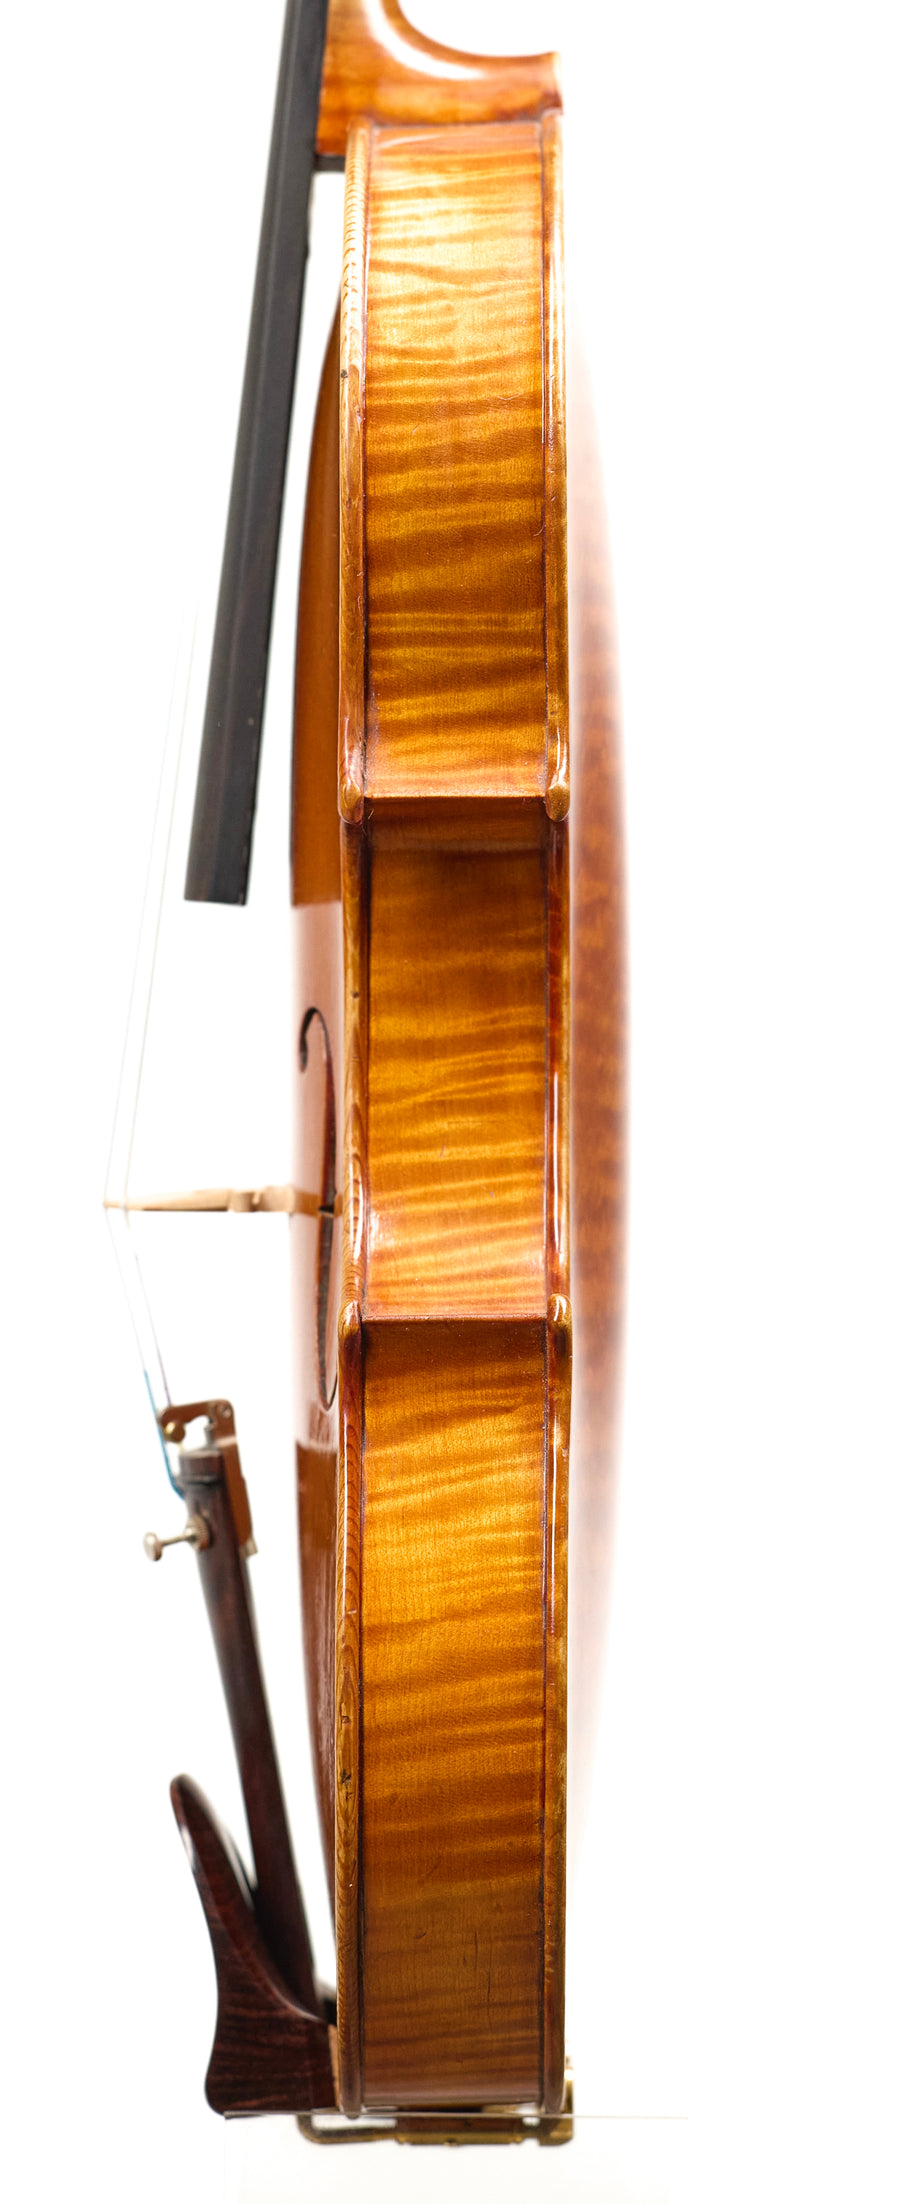 A Contemporary French Violin By Cremona Trained Alain Pignoux In Tours, 2009.